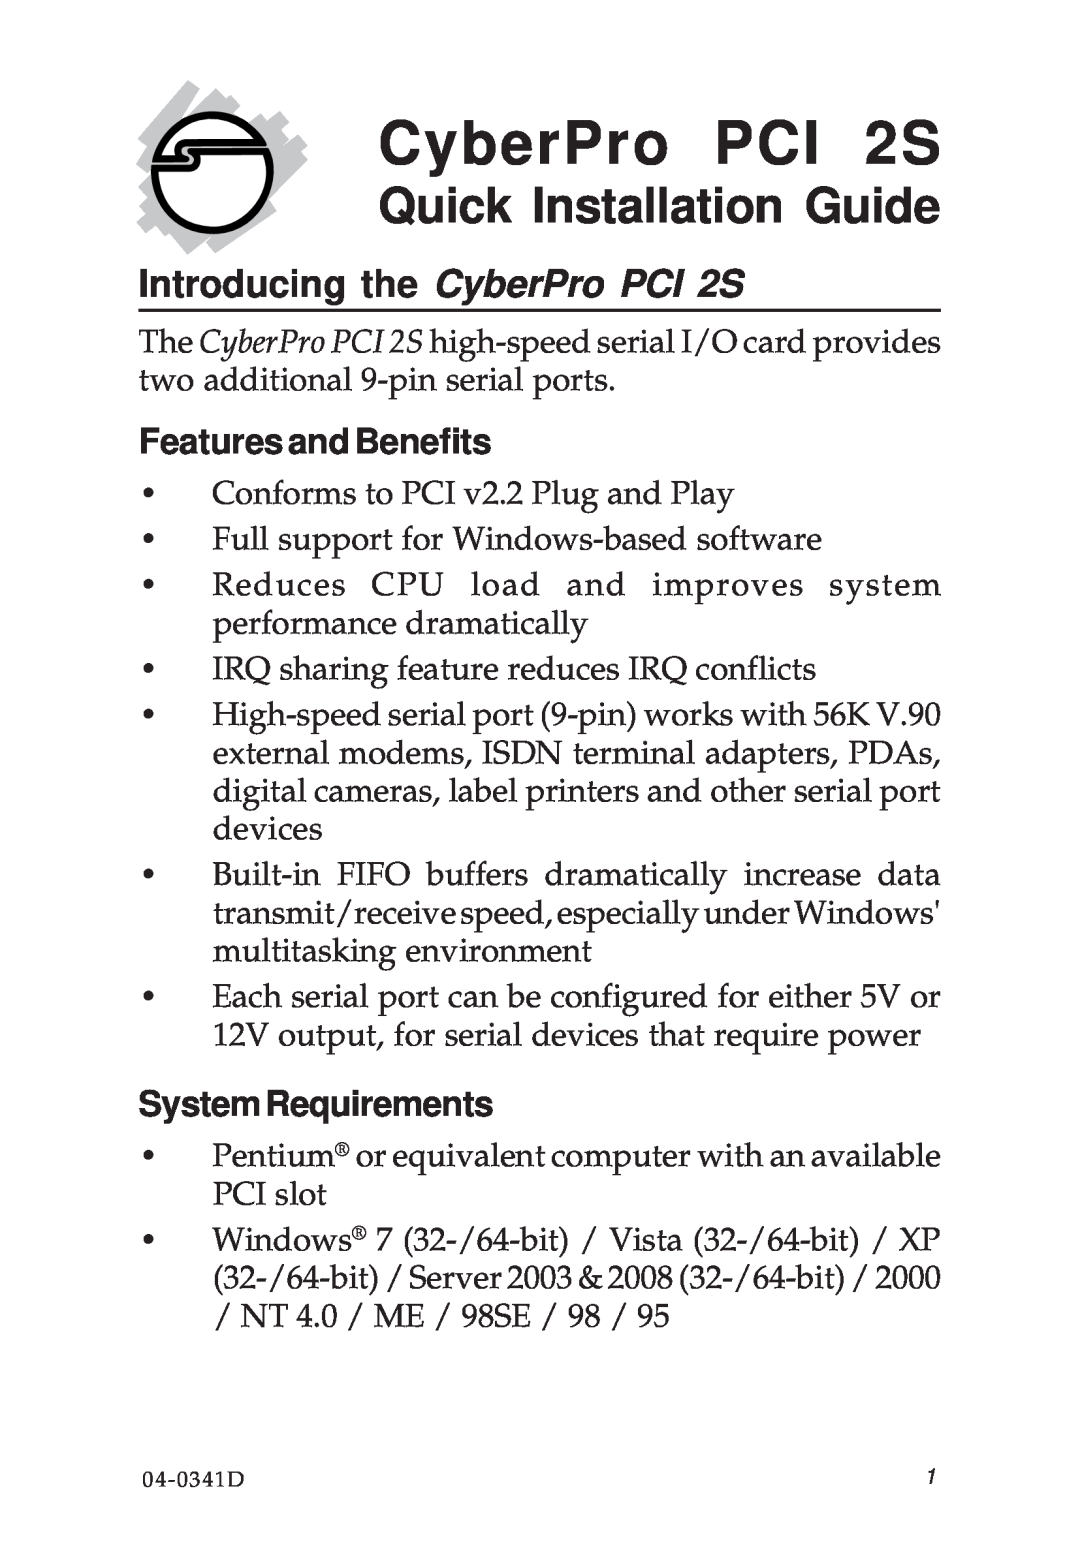 SIIG 04-0341D manual Introducing the CyberPro PCI 2S, Features and Benefits, SystemRequirements, Quick Installation Guide 